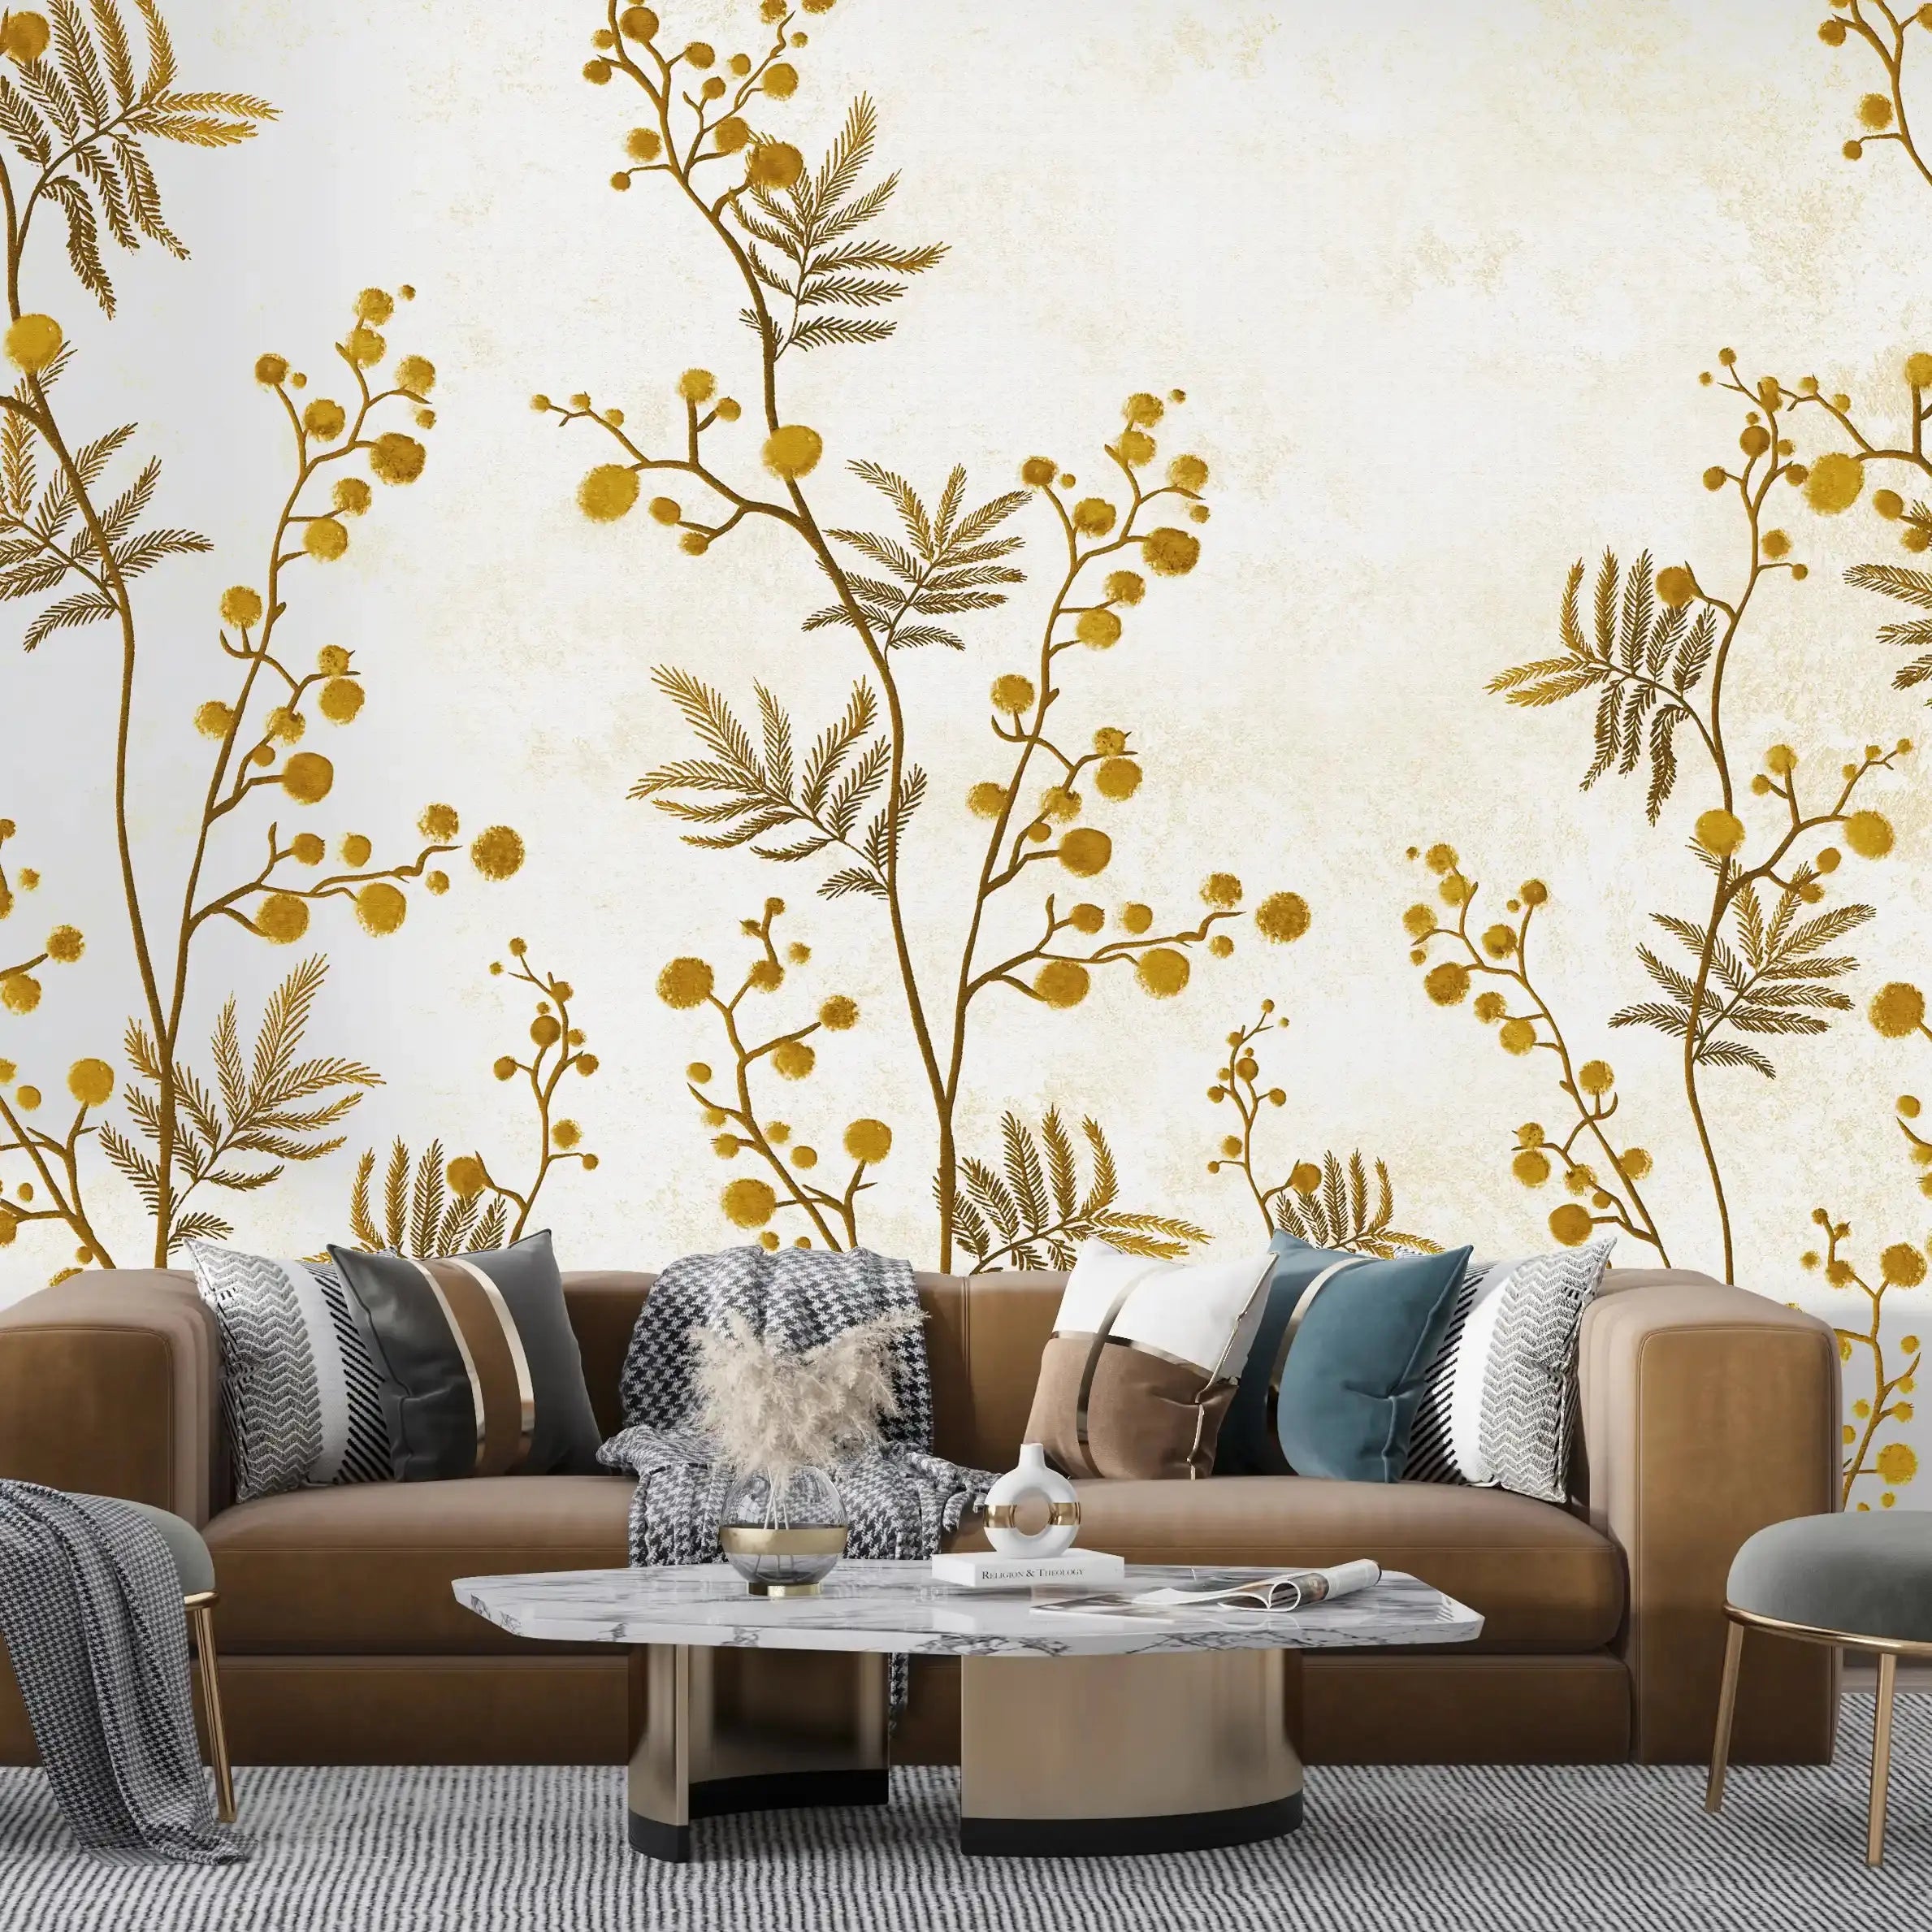 3016-D / Temporary Wallpaper: Floral Wall Mural with Easy Peel Off Design, Ideal for Accent Walls and Shelf Drawers - Artevella